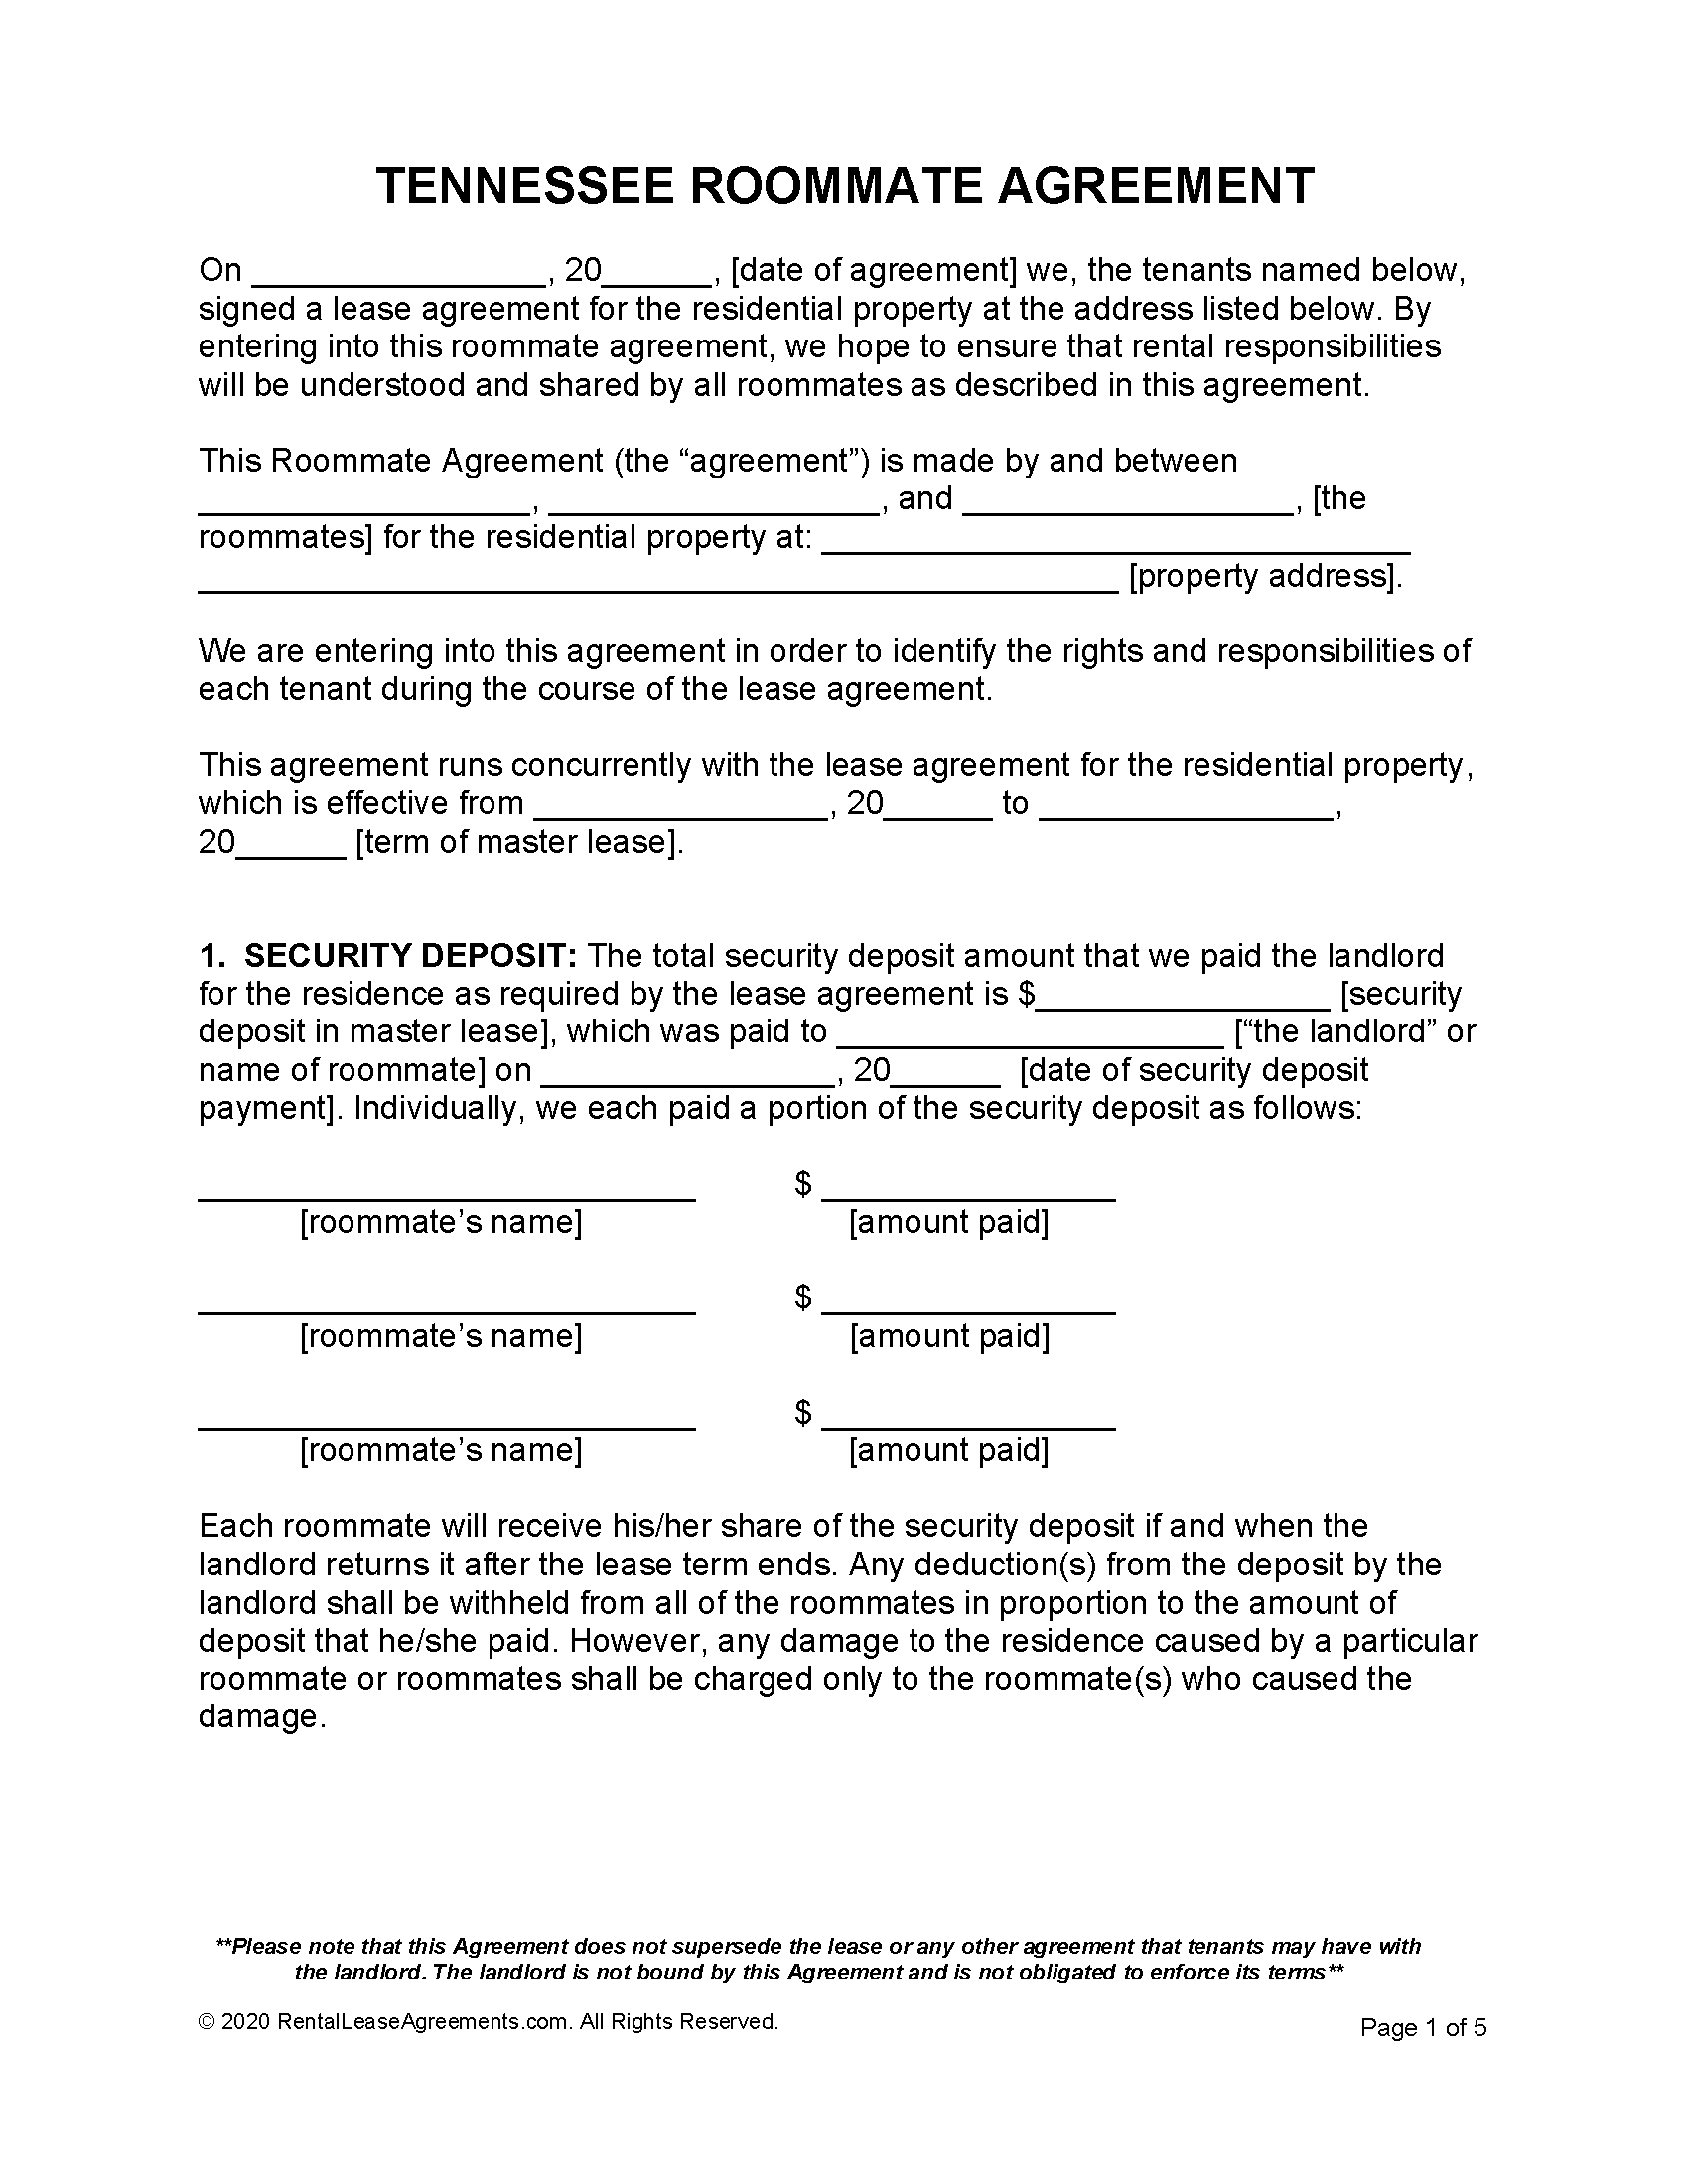 free-tennessee-roommate-agreement-pdf-ms-word